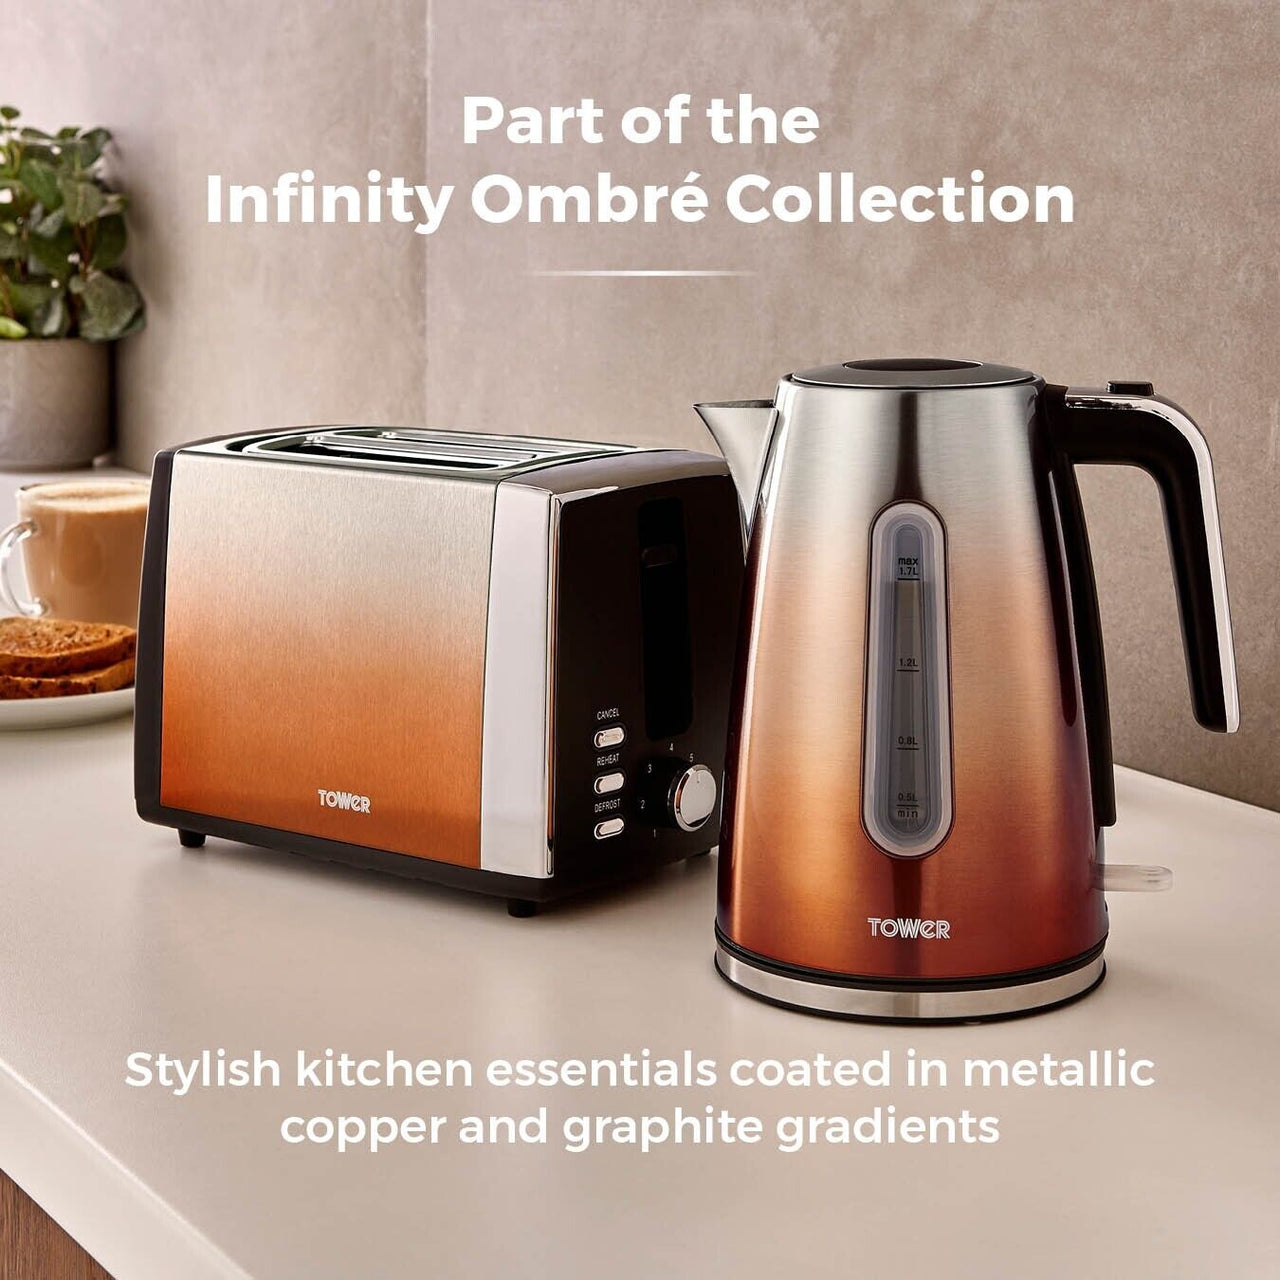 Tower Infinity Ombre Copper 3KW 1.7L Kettle & 2 Slice 900W Toaster Matching Set